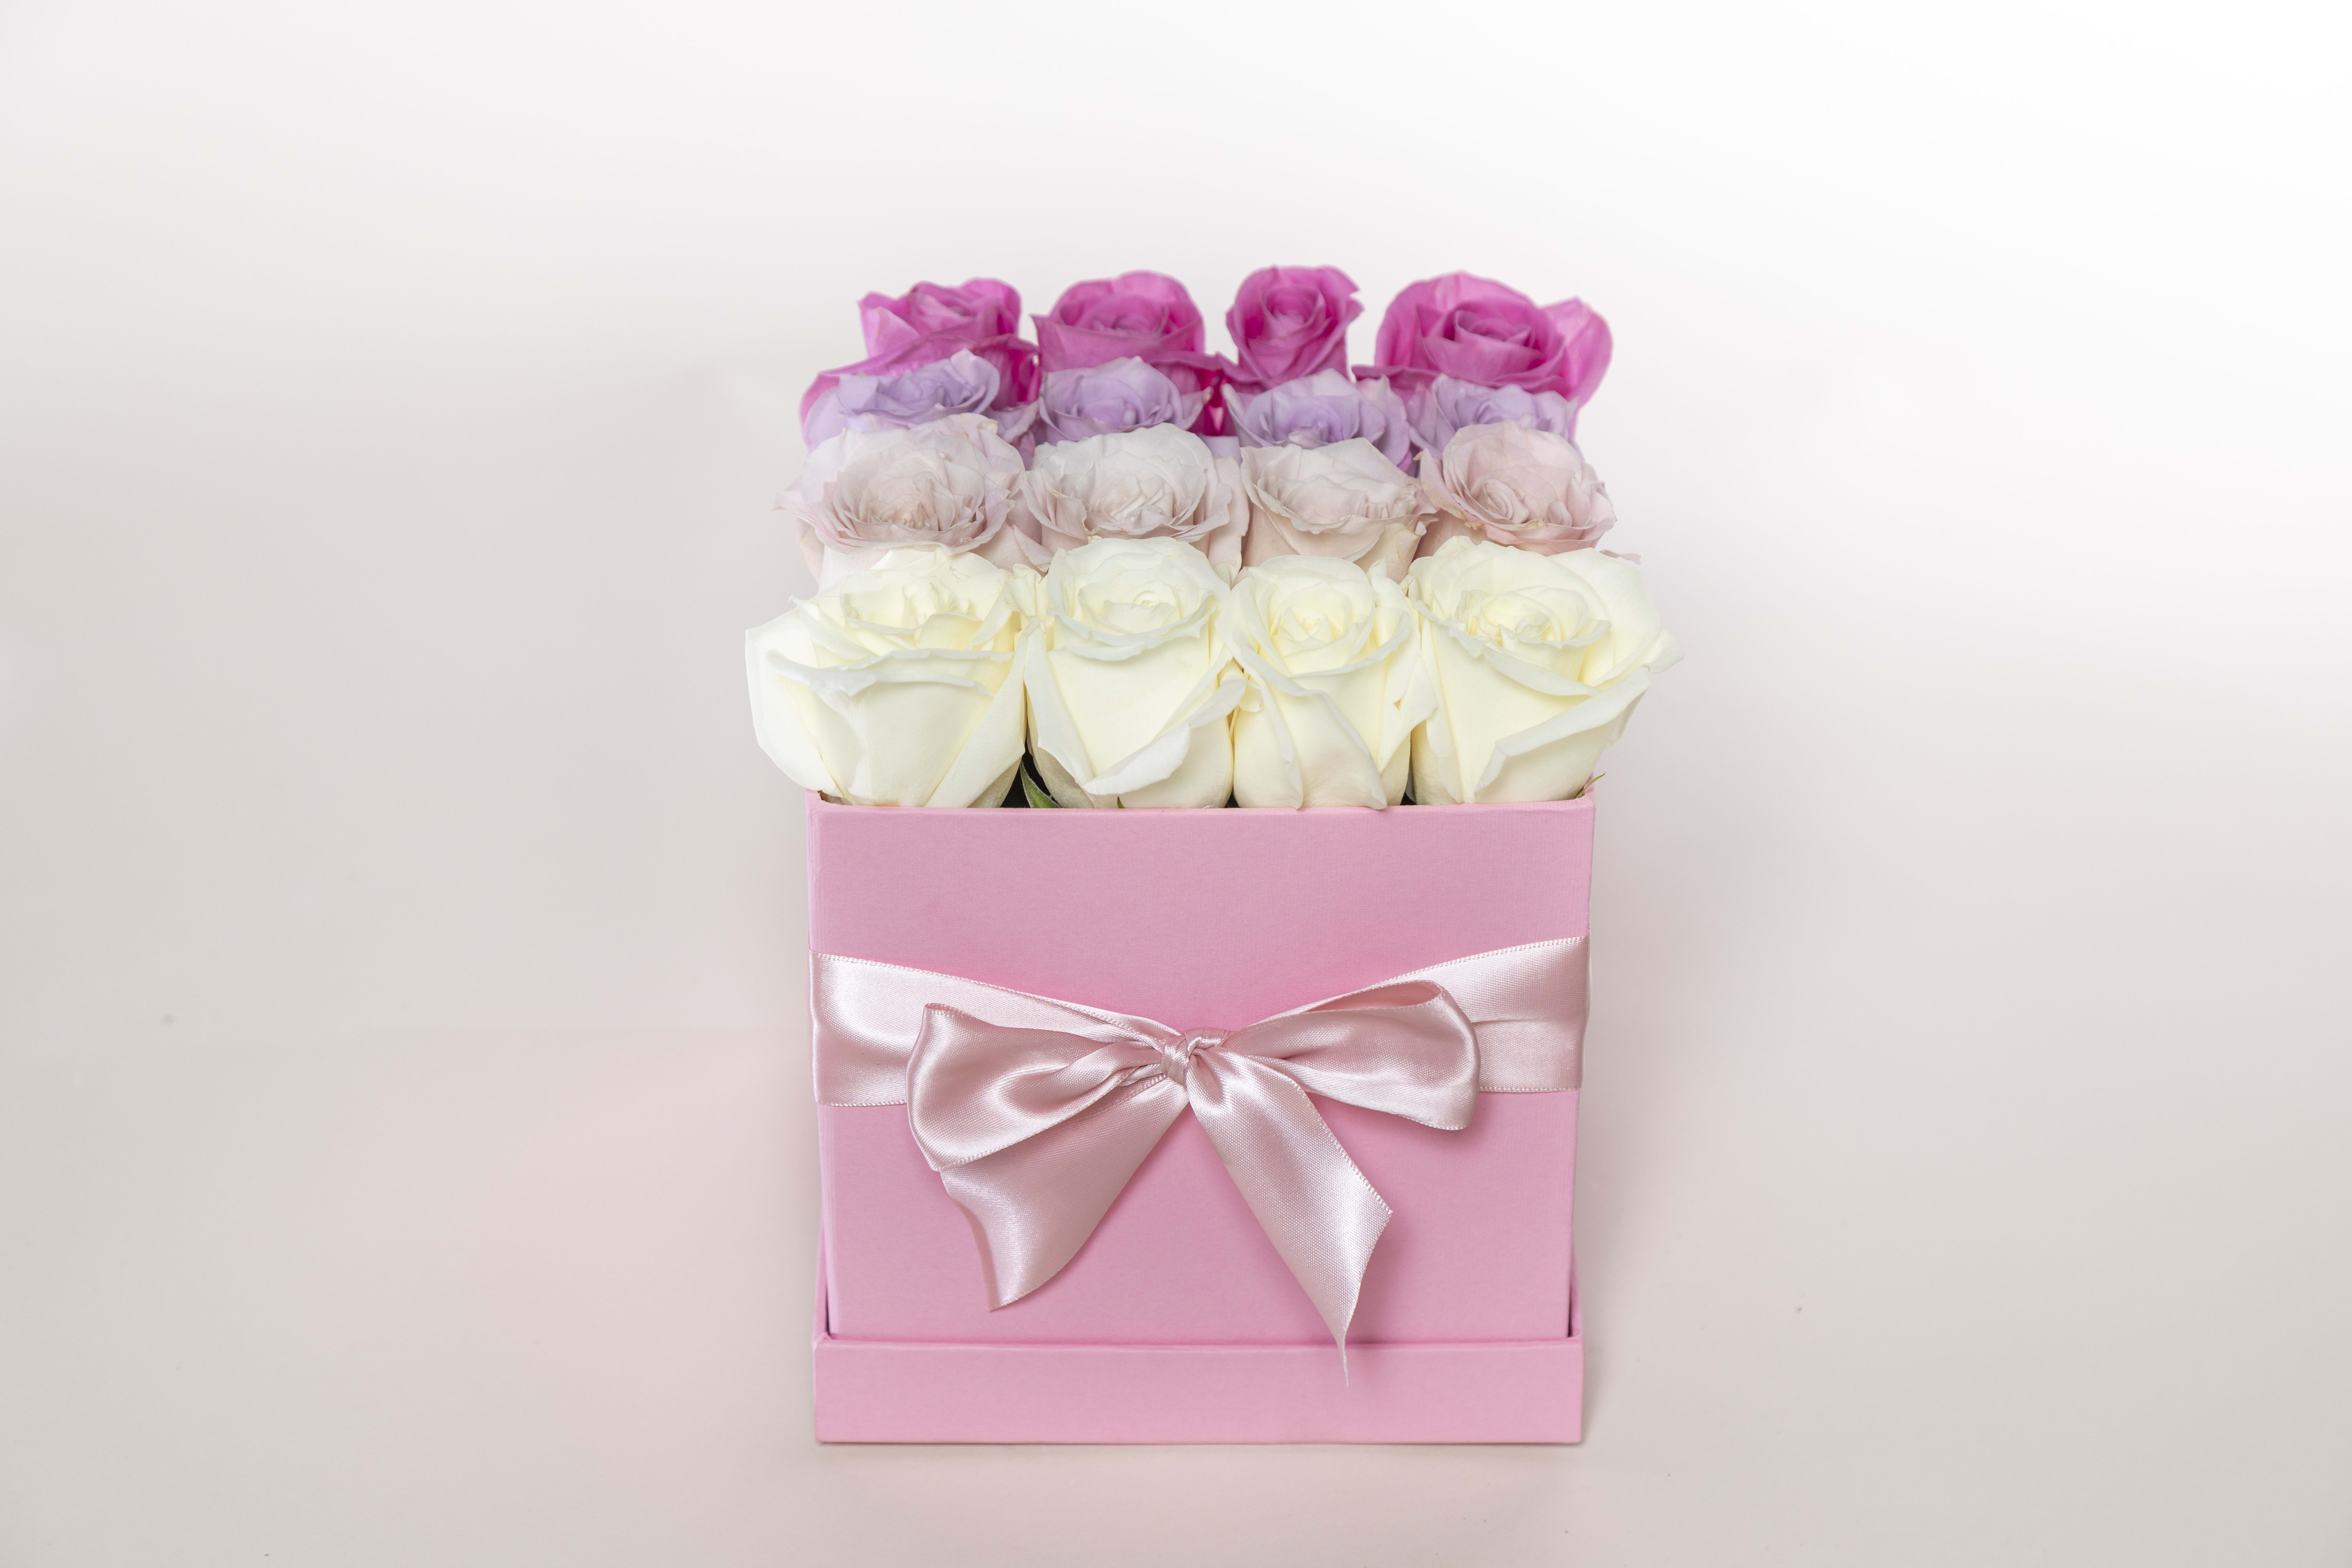 Perfect Pinks - Stylish gift box with an pink ombre design with roses